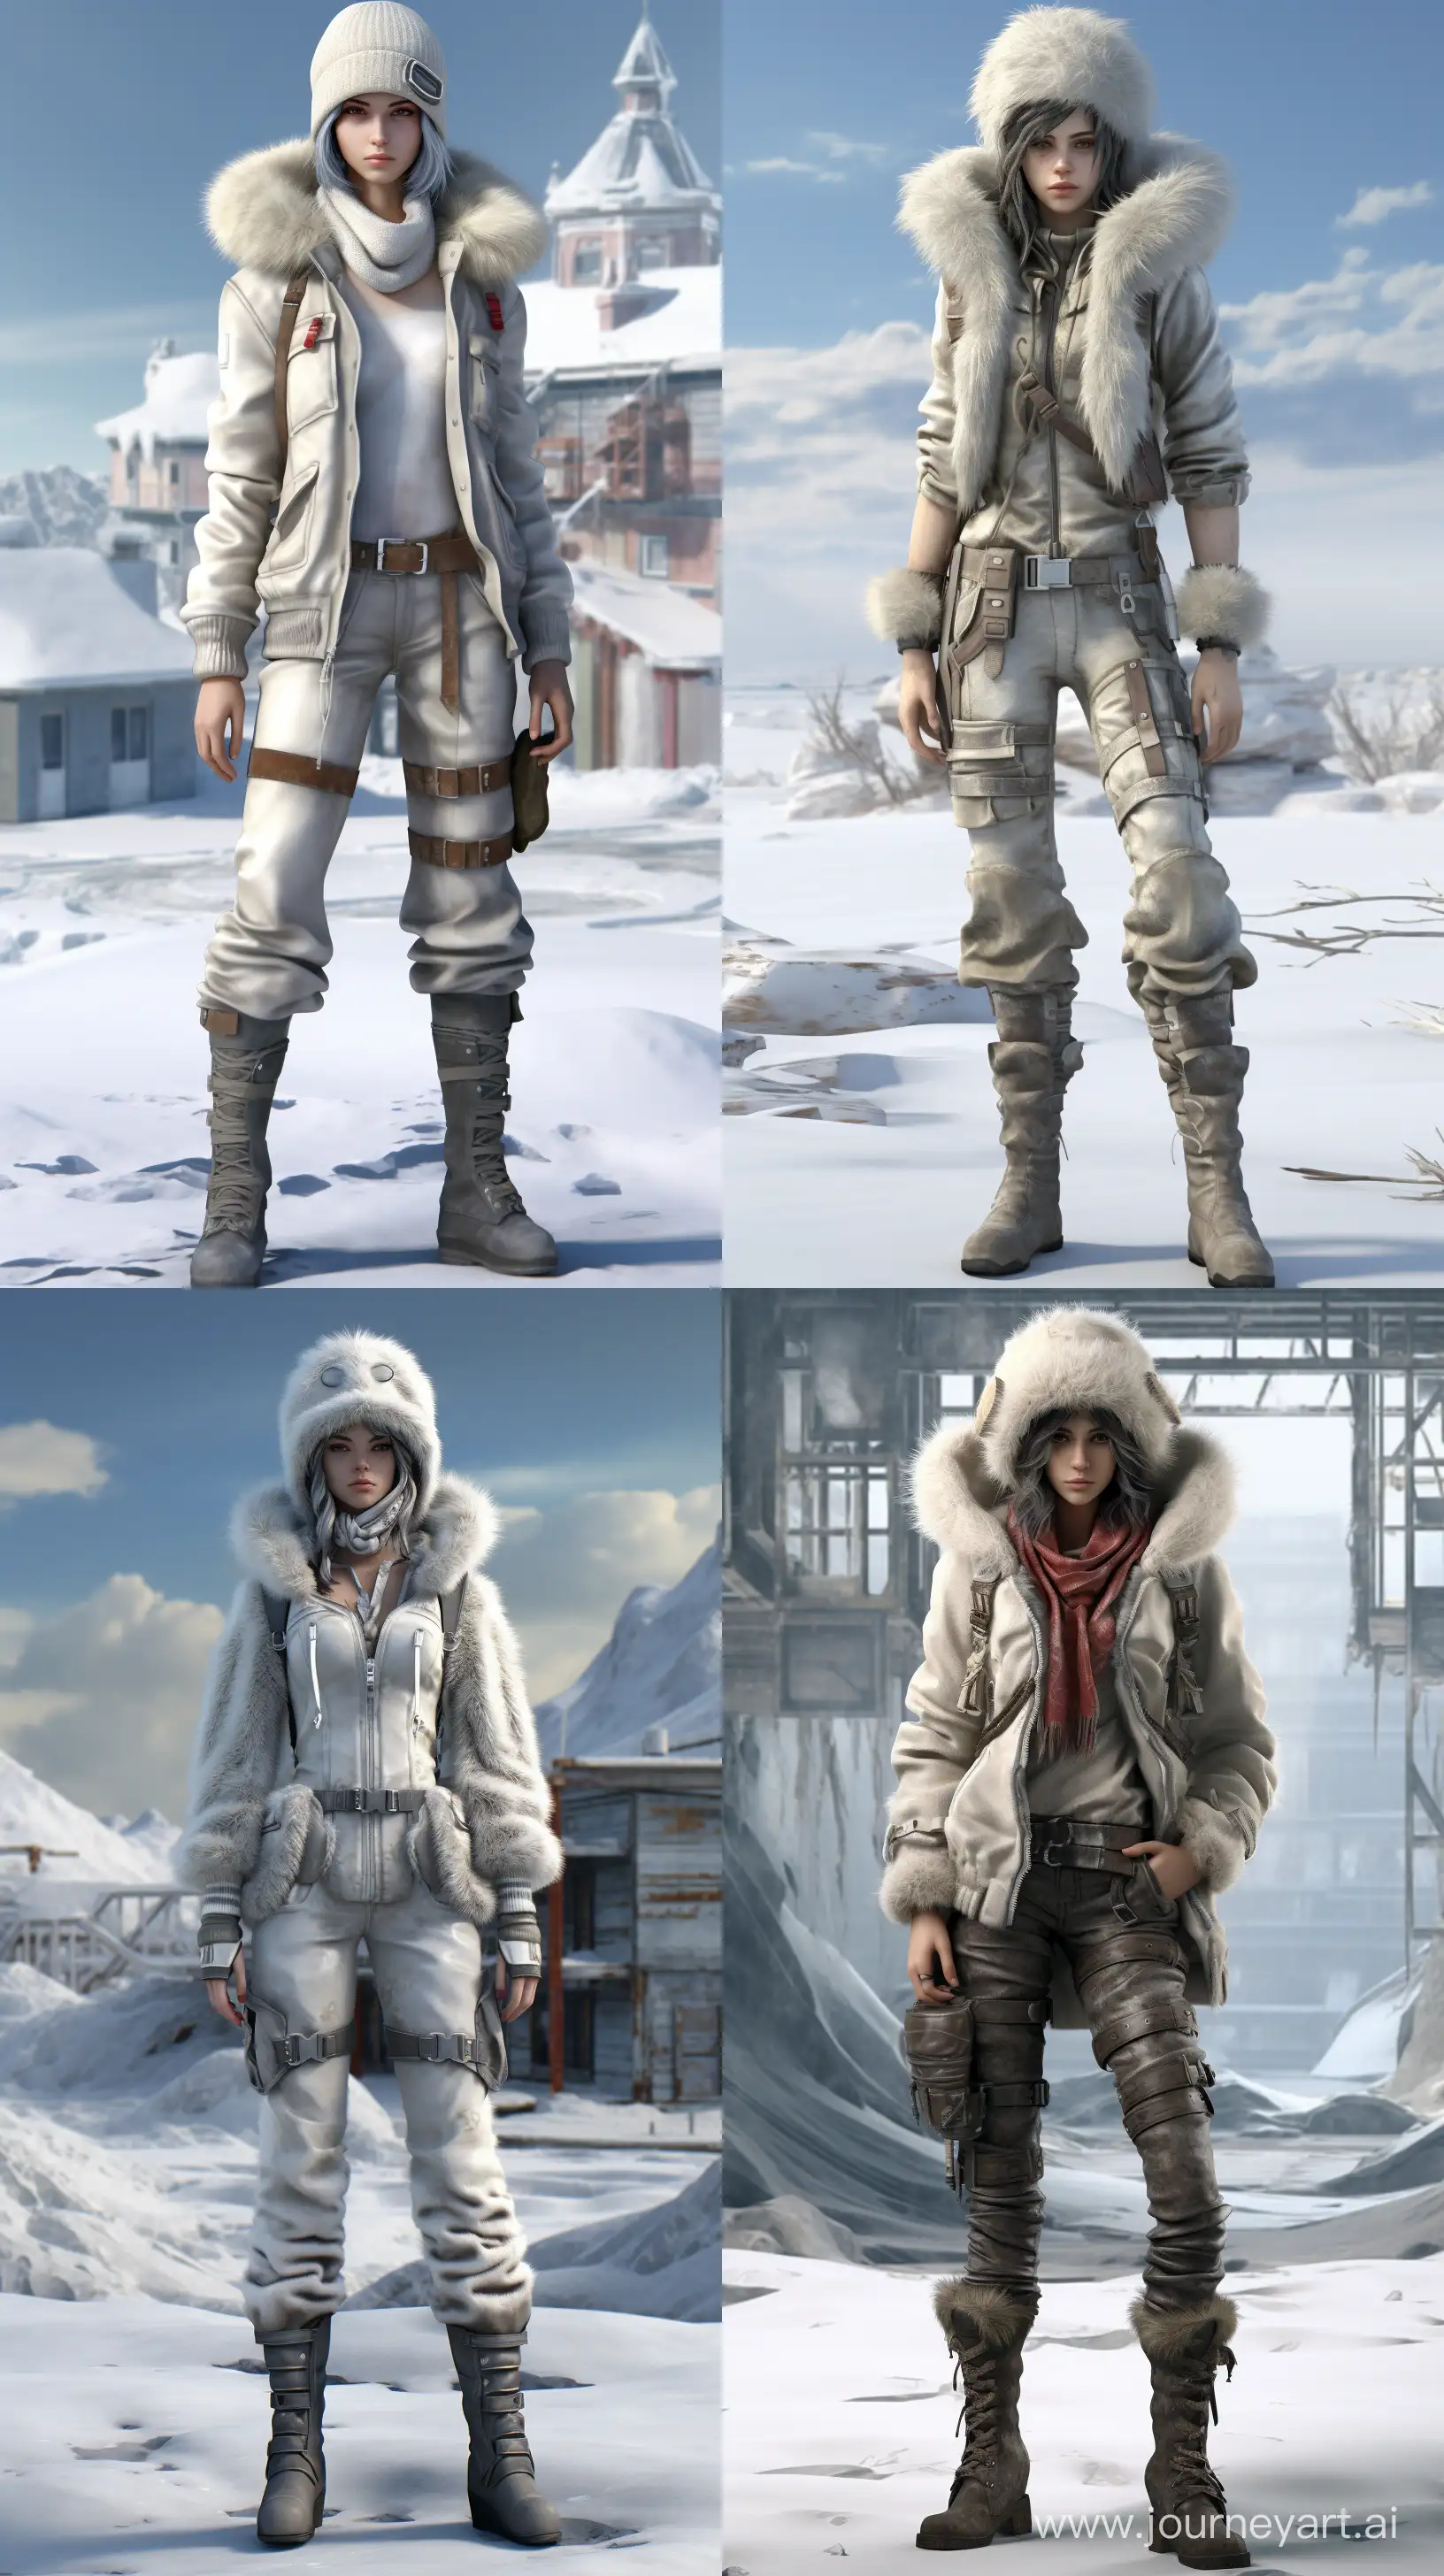 PostApocalyptic-Tomboy-Woman-in-Communist-Snow-Camouflage-Military-Uniform